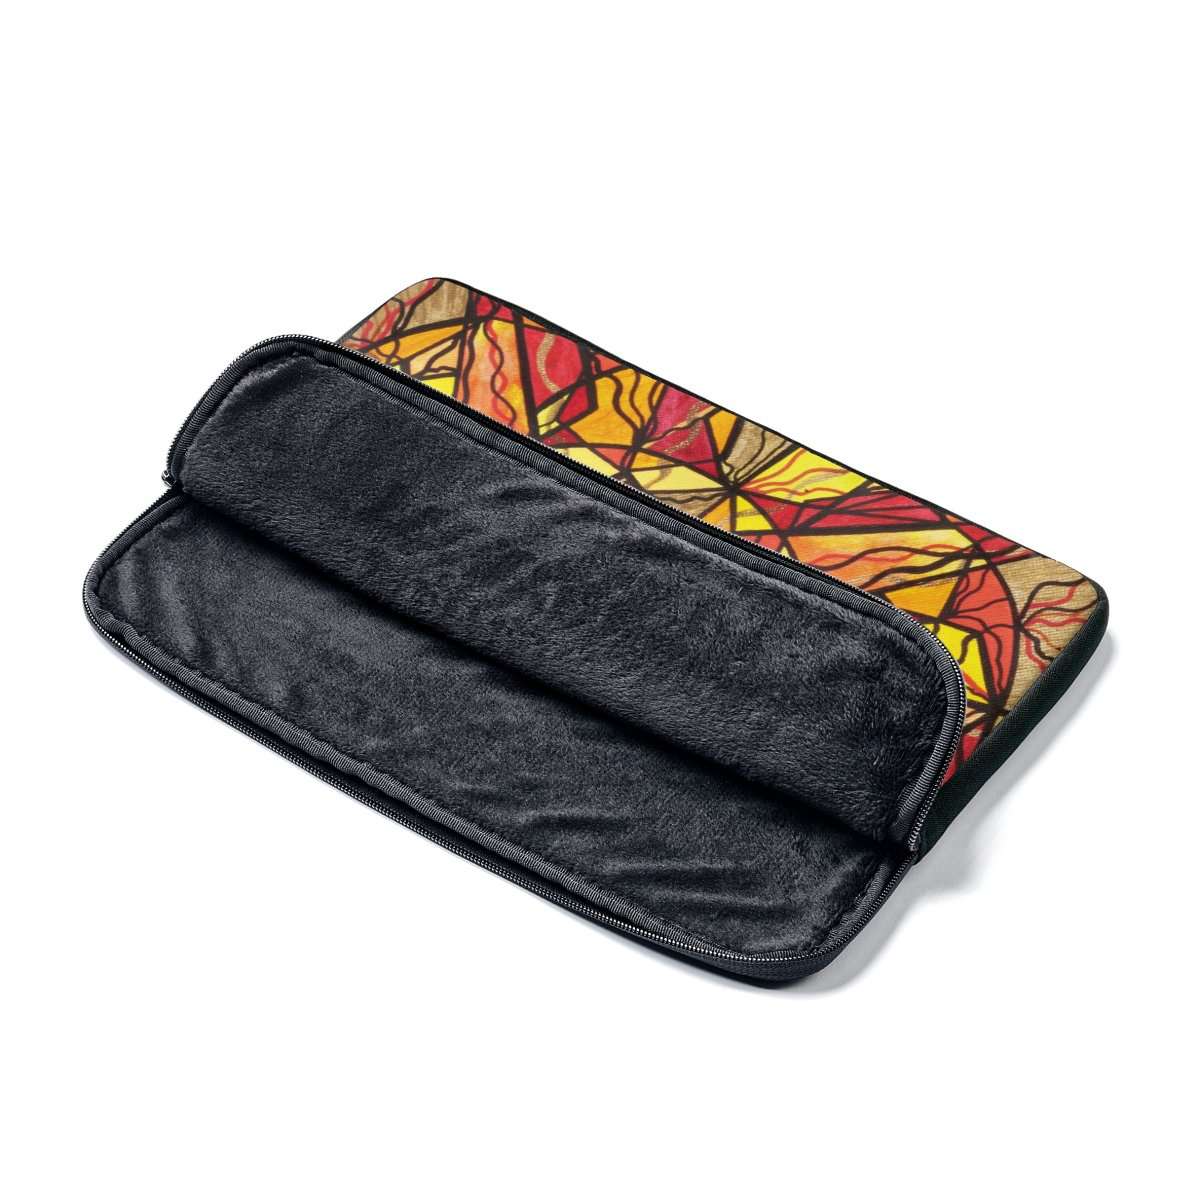 shop-without-worry-for-empowerment-laptop-sleeve-online-hot-sale_2.jpg